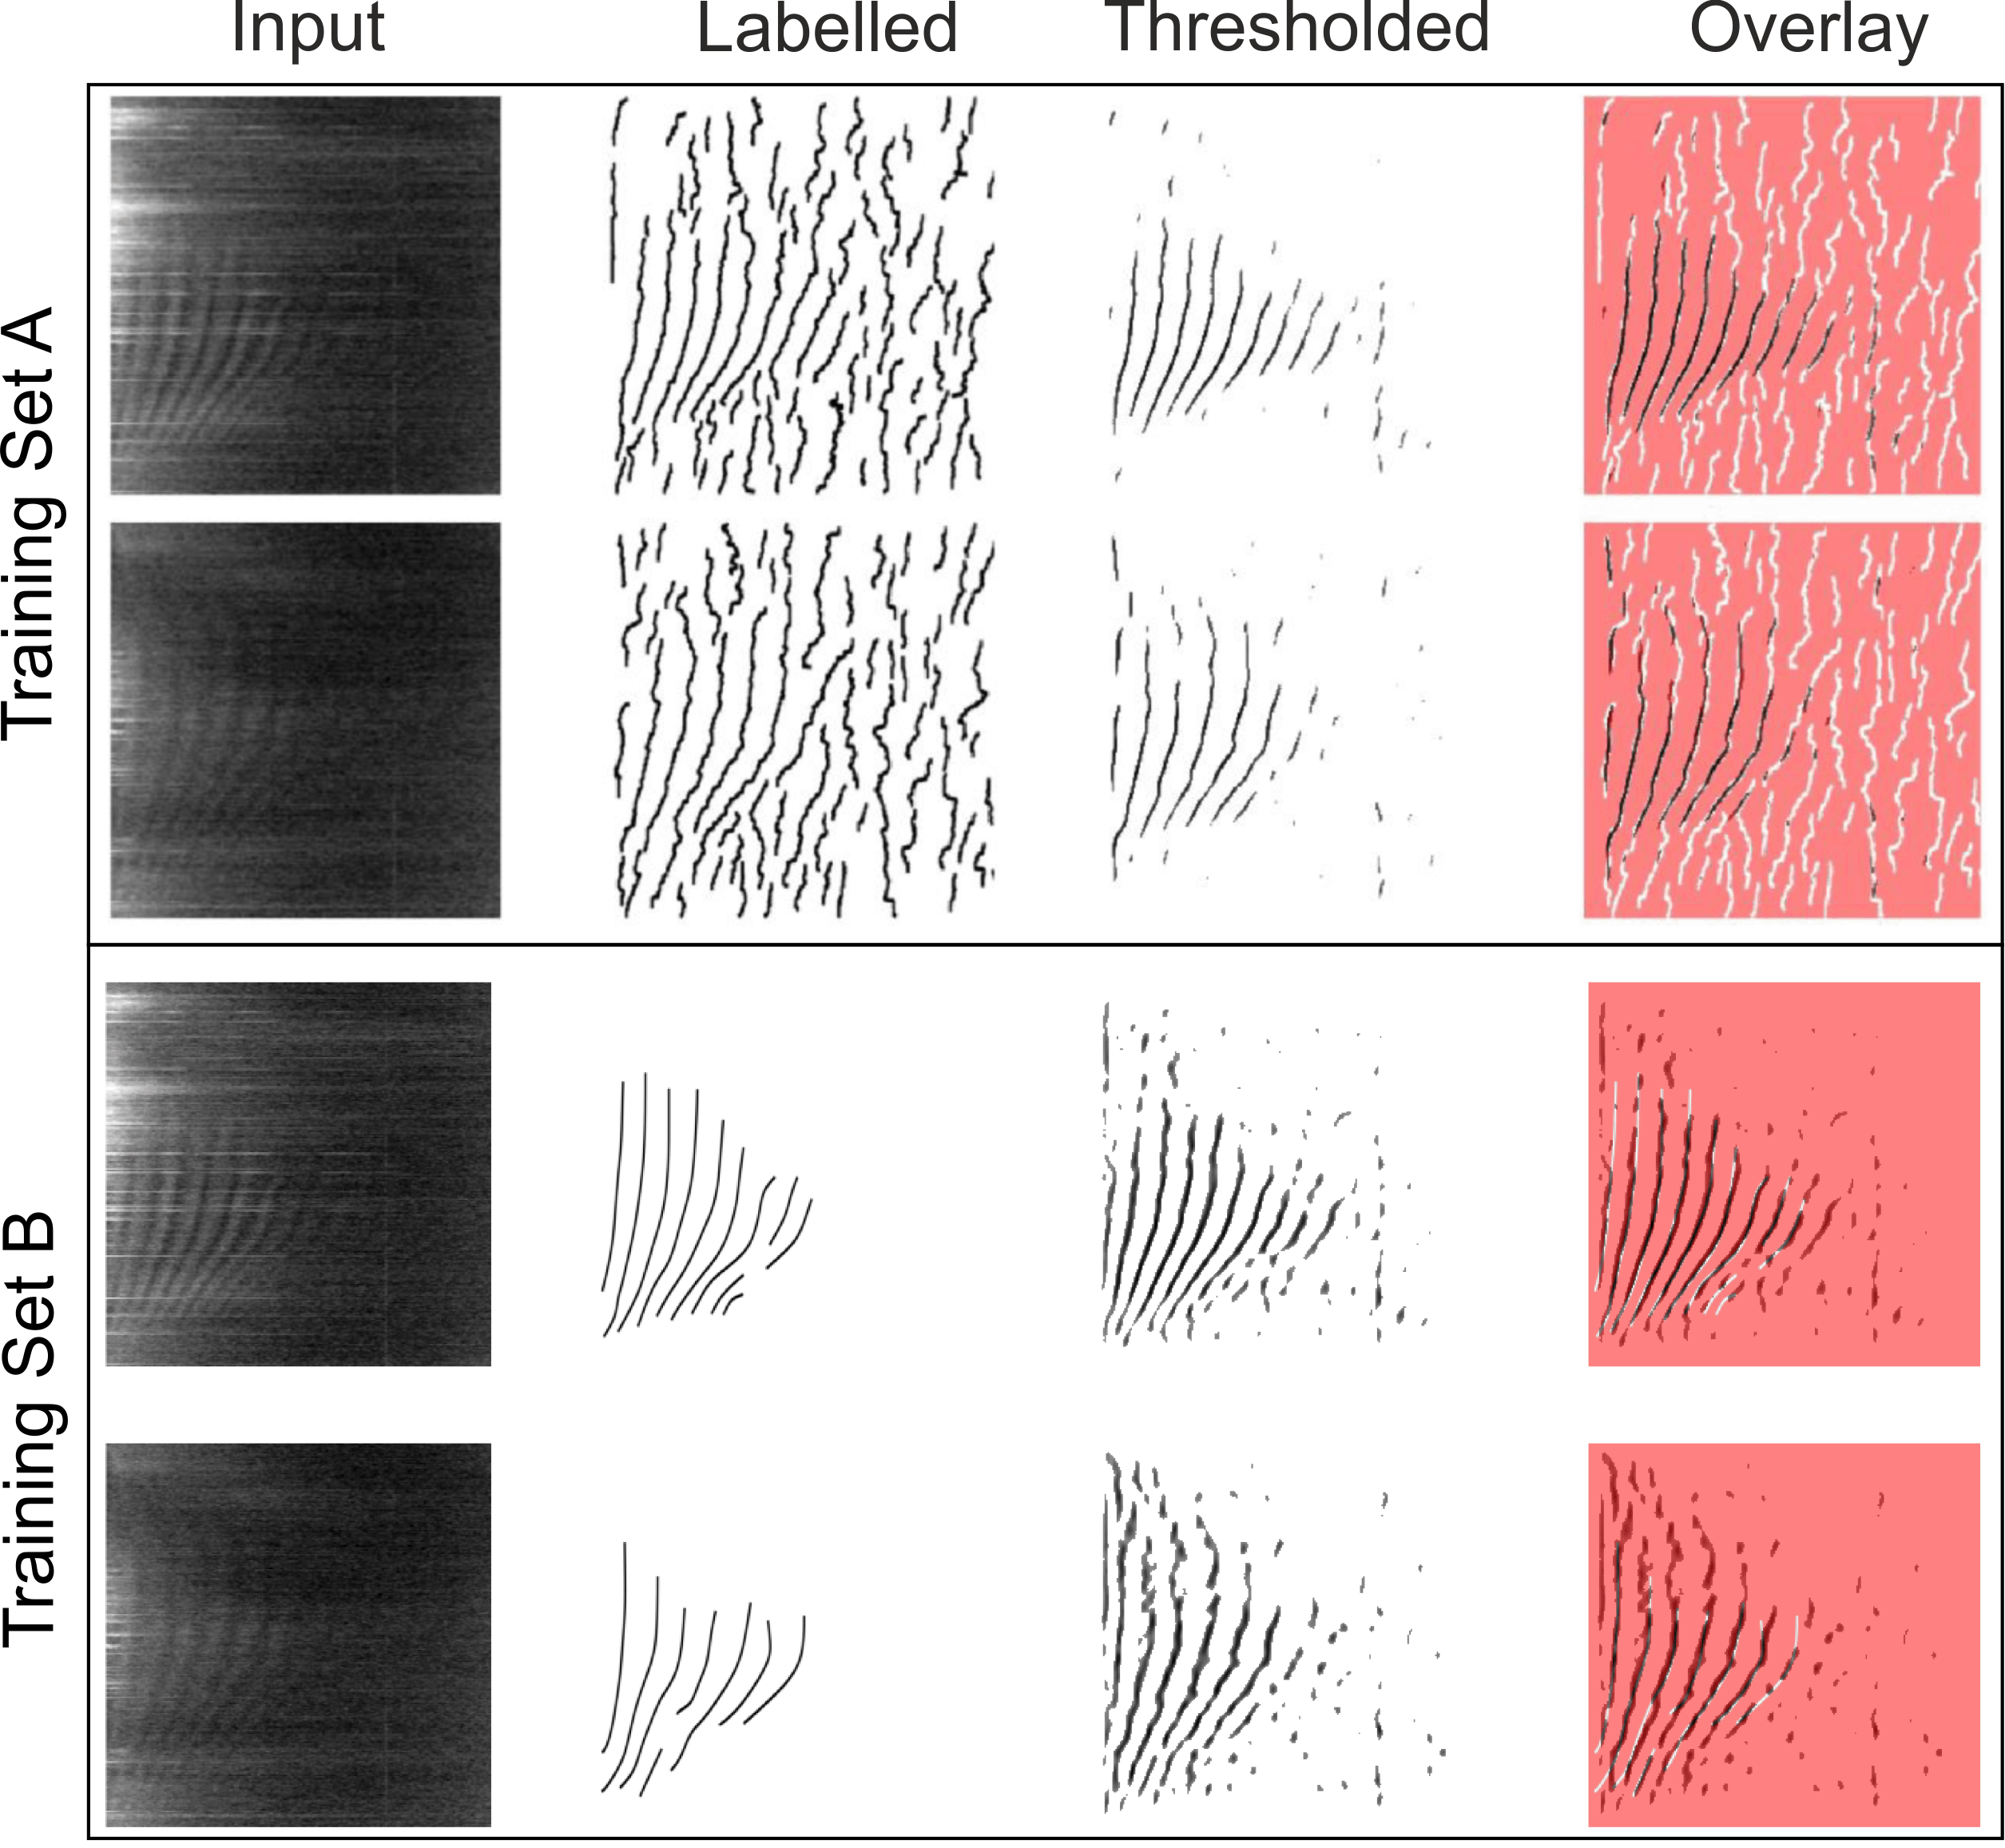 Qualitative assessment of performance of original data analysis method against predictive model generated by training U-net on either Training Set A (top) or B (bottom). (First column from left). Spectrograms for 05-Sep-2012 and 06-Sep-2012 drawn from the test set. (Second column). Respective `ground truth' images. (Third column). Respective thresholded (with value of 0.5 or 0.8 for Training Set A or B, respectively) prediction output. (Fourth column). Overlay of the ground truth image in the second column on the thresholded prediction output in the third column.